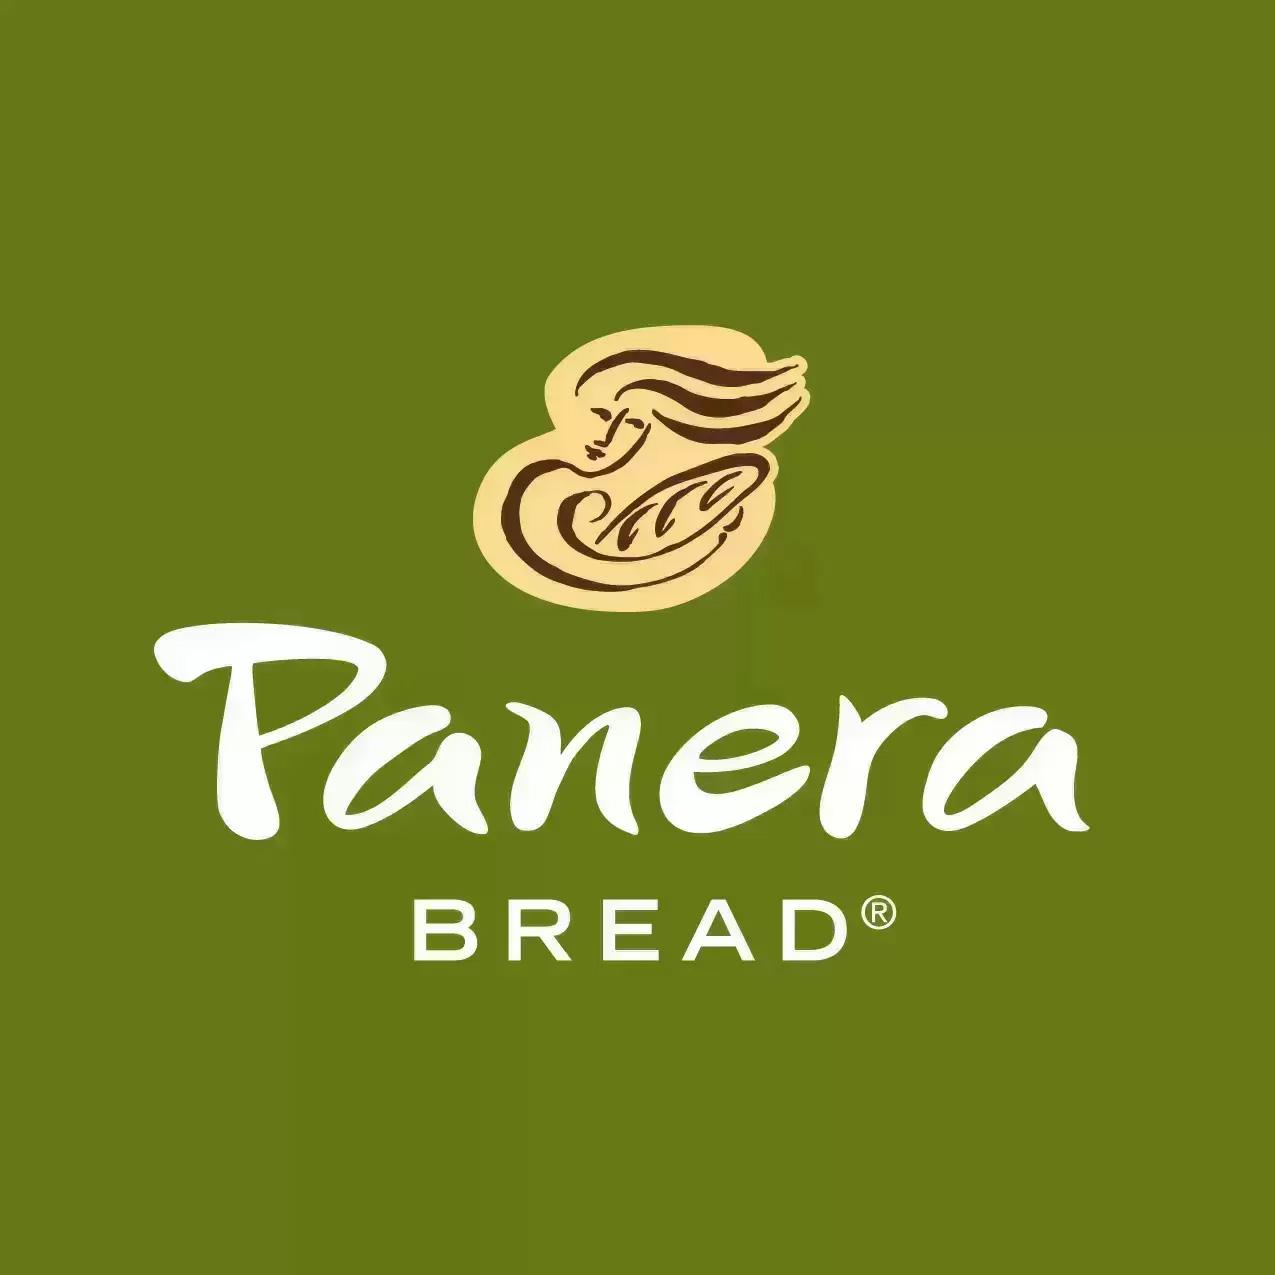 Panera Bread Curbside Pickup $5 Off Coupon